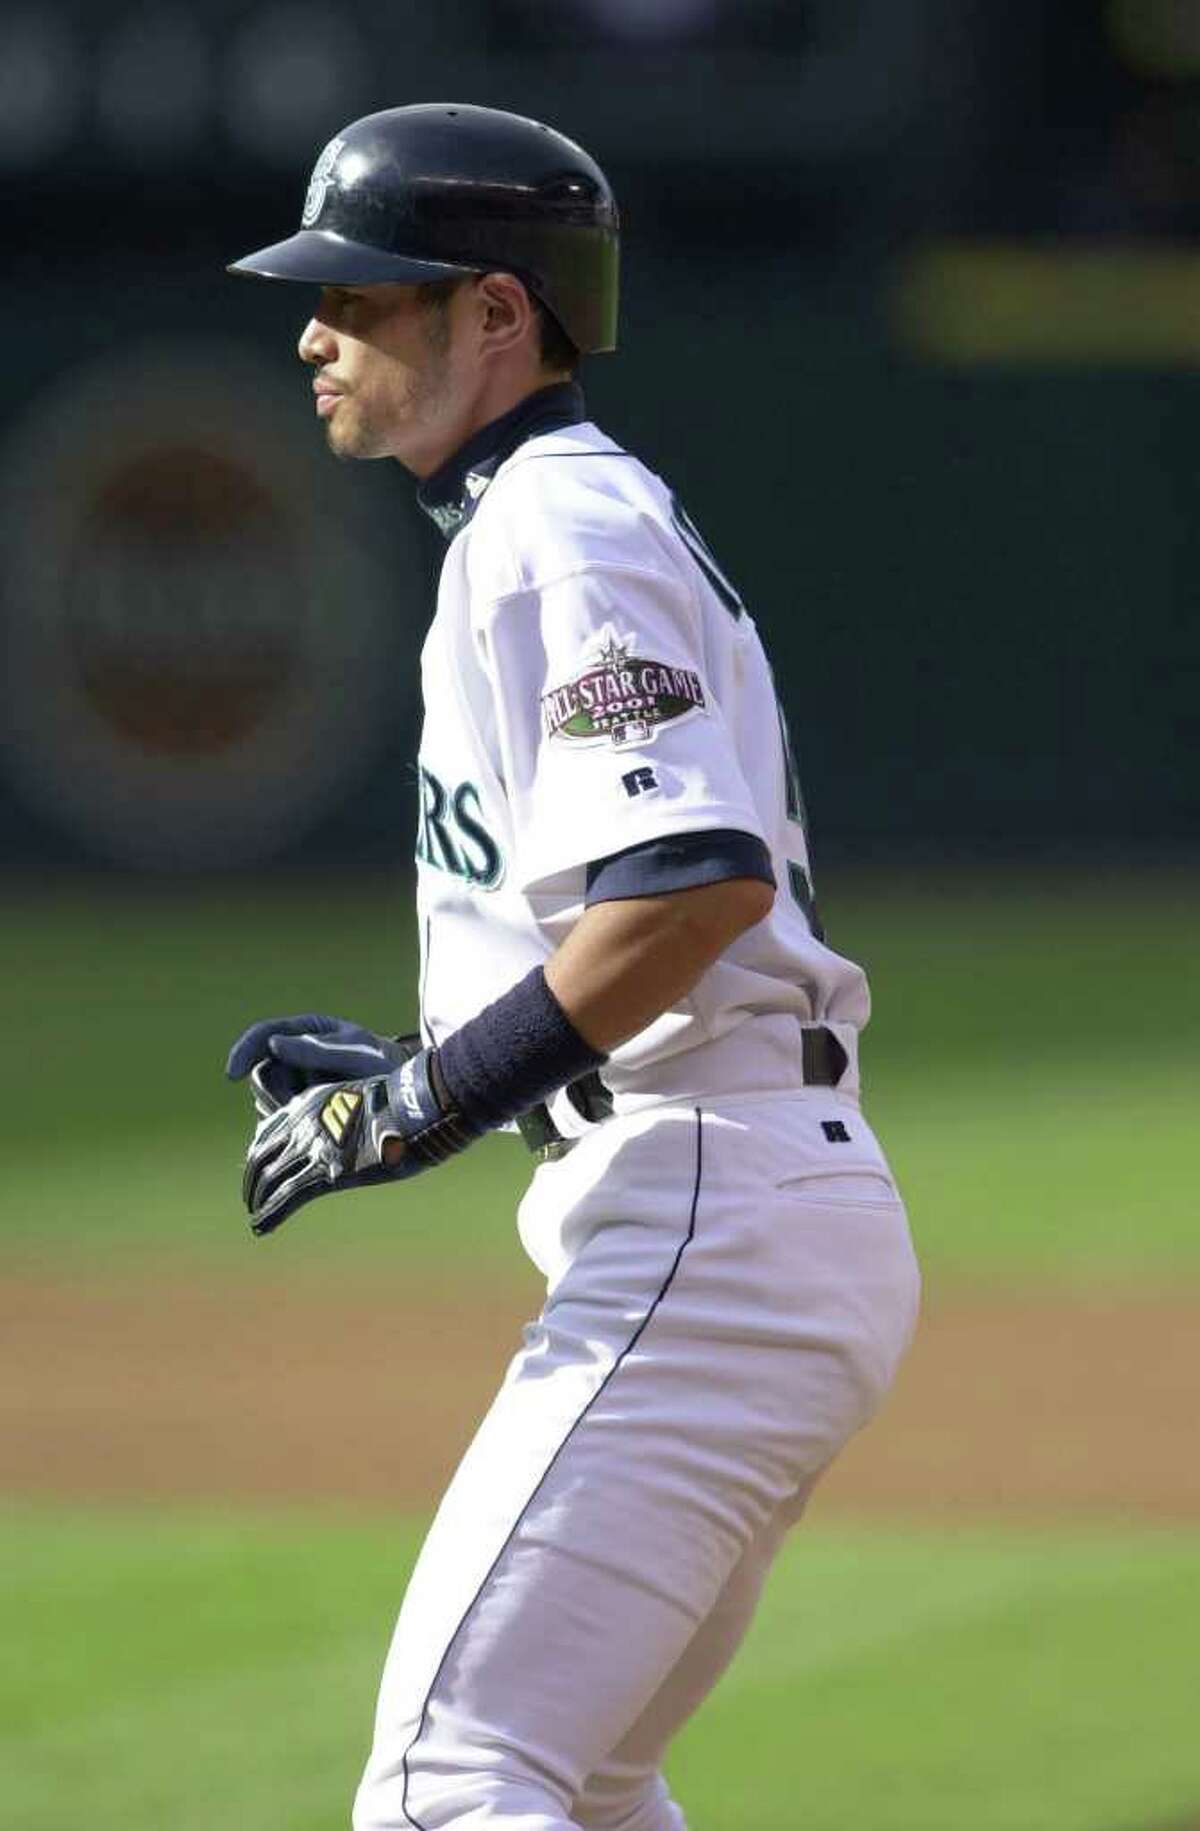 10 Jul 2001: Ichiro Suzuki of the Seattle Mariners leads off of first base during the 2001 Major League Baseball All-Star game at Safeco Field in Seattle, Washington, won by the American League 4-1. DIGITAL IMAGE Mandatory Credit: Otto Gruele/Allsport